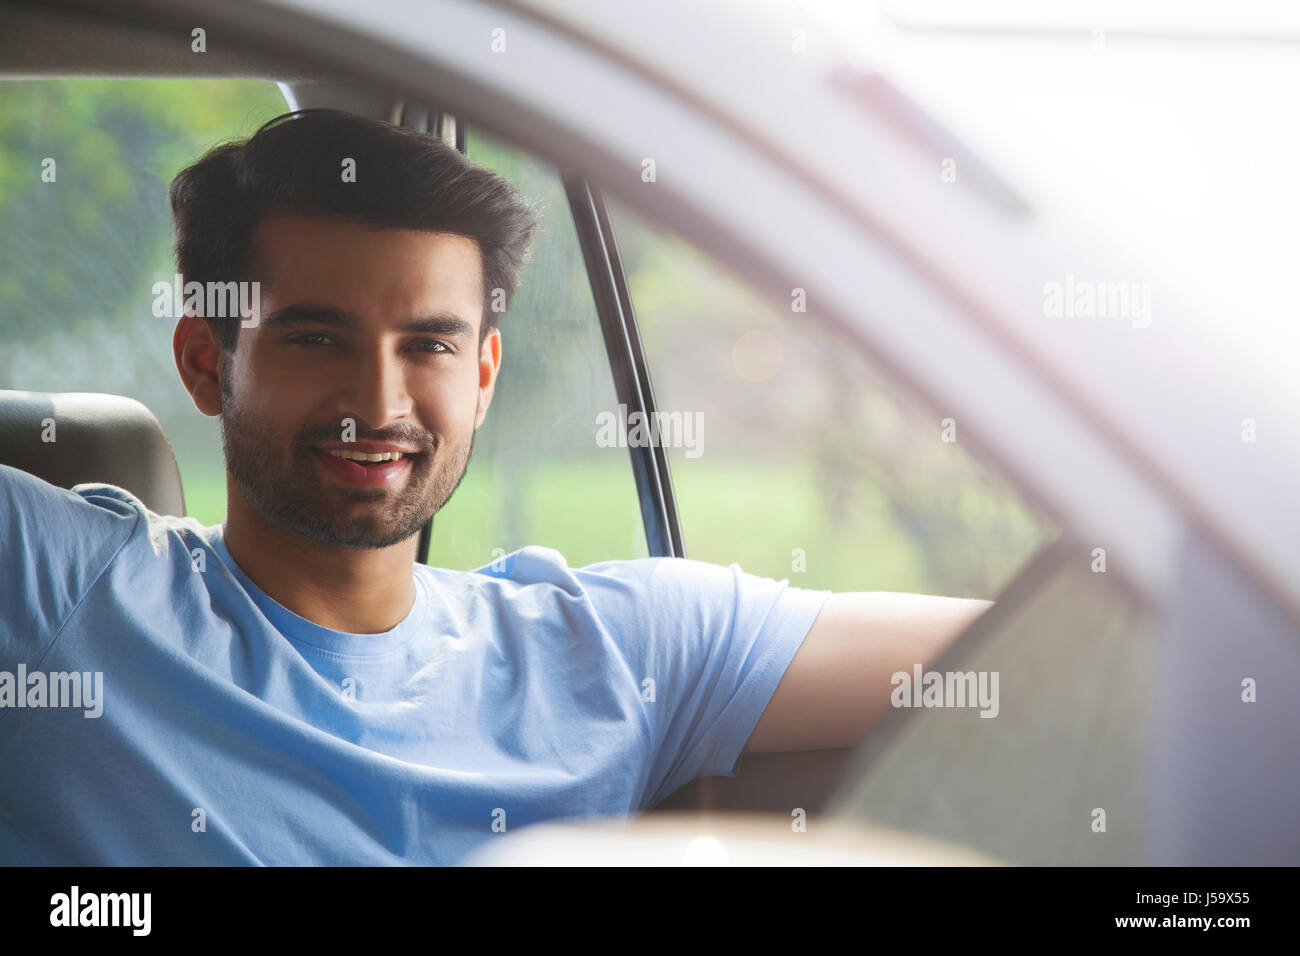 Portrait of young man sitting in car Stock Photo